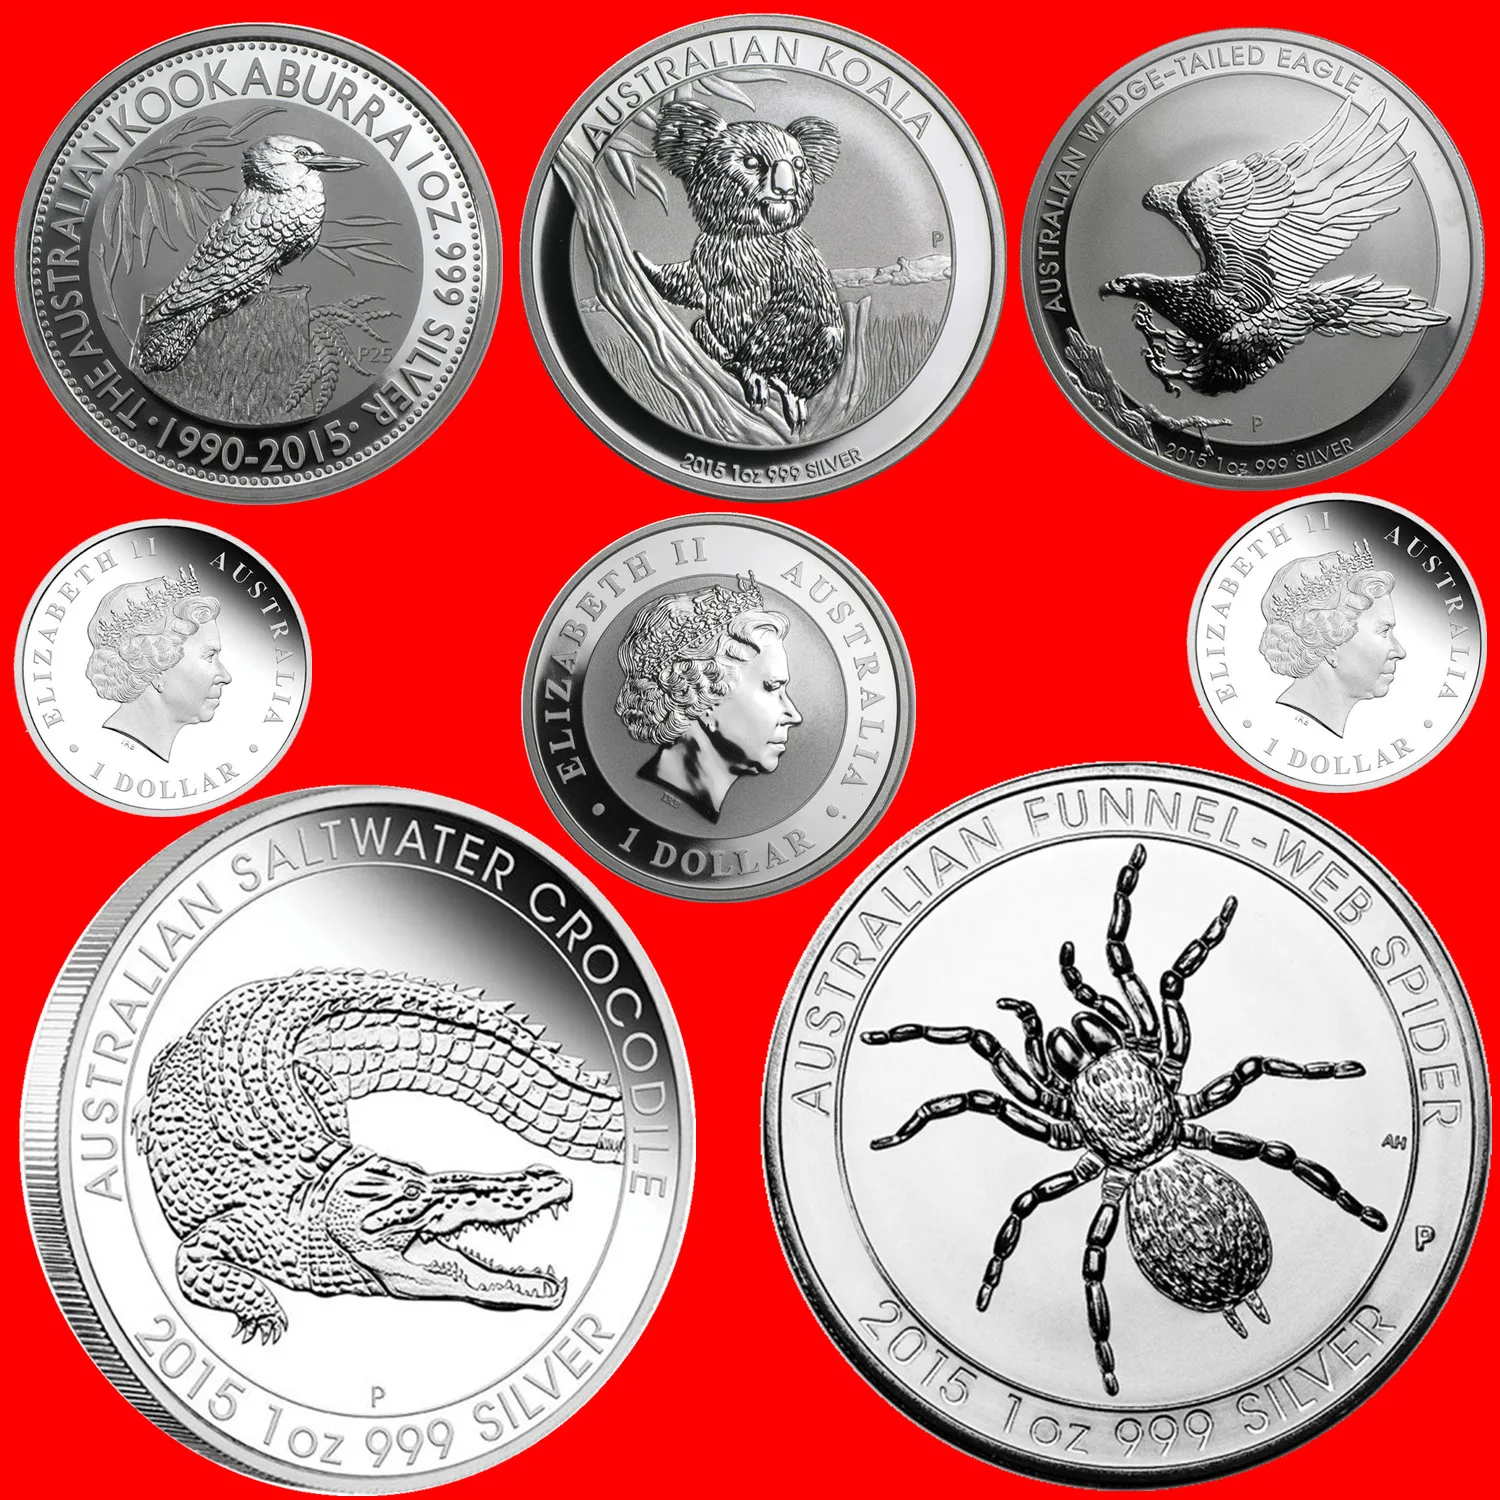 1 oz 2015 Australia Silver Coin High Quality Gift Crafts